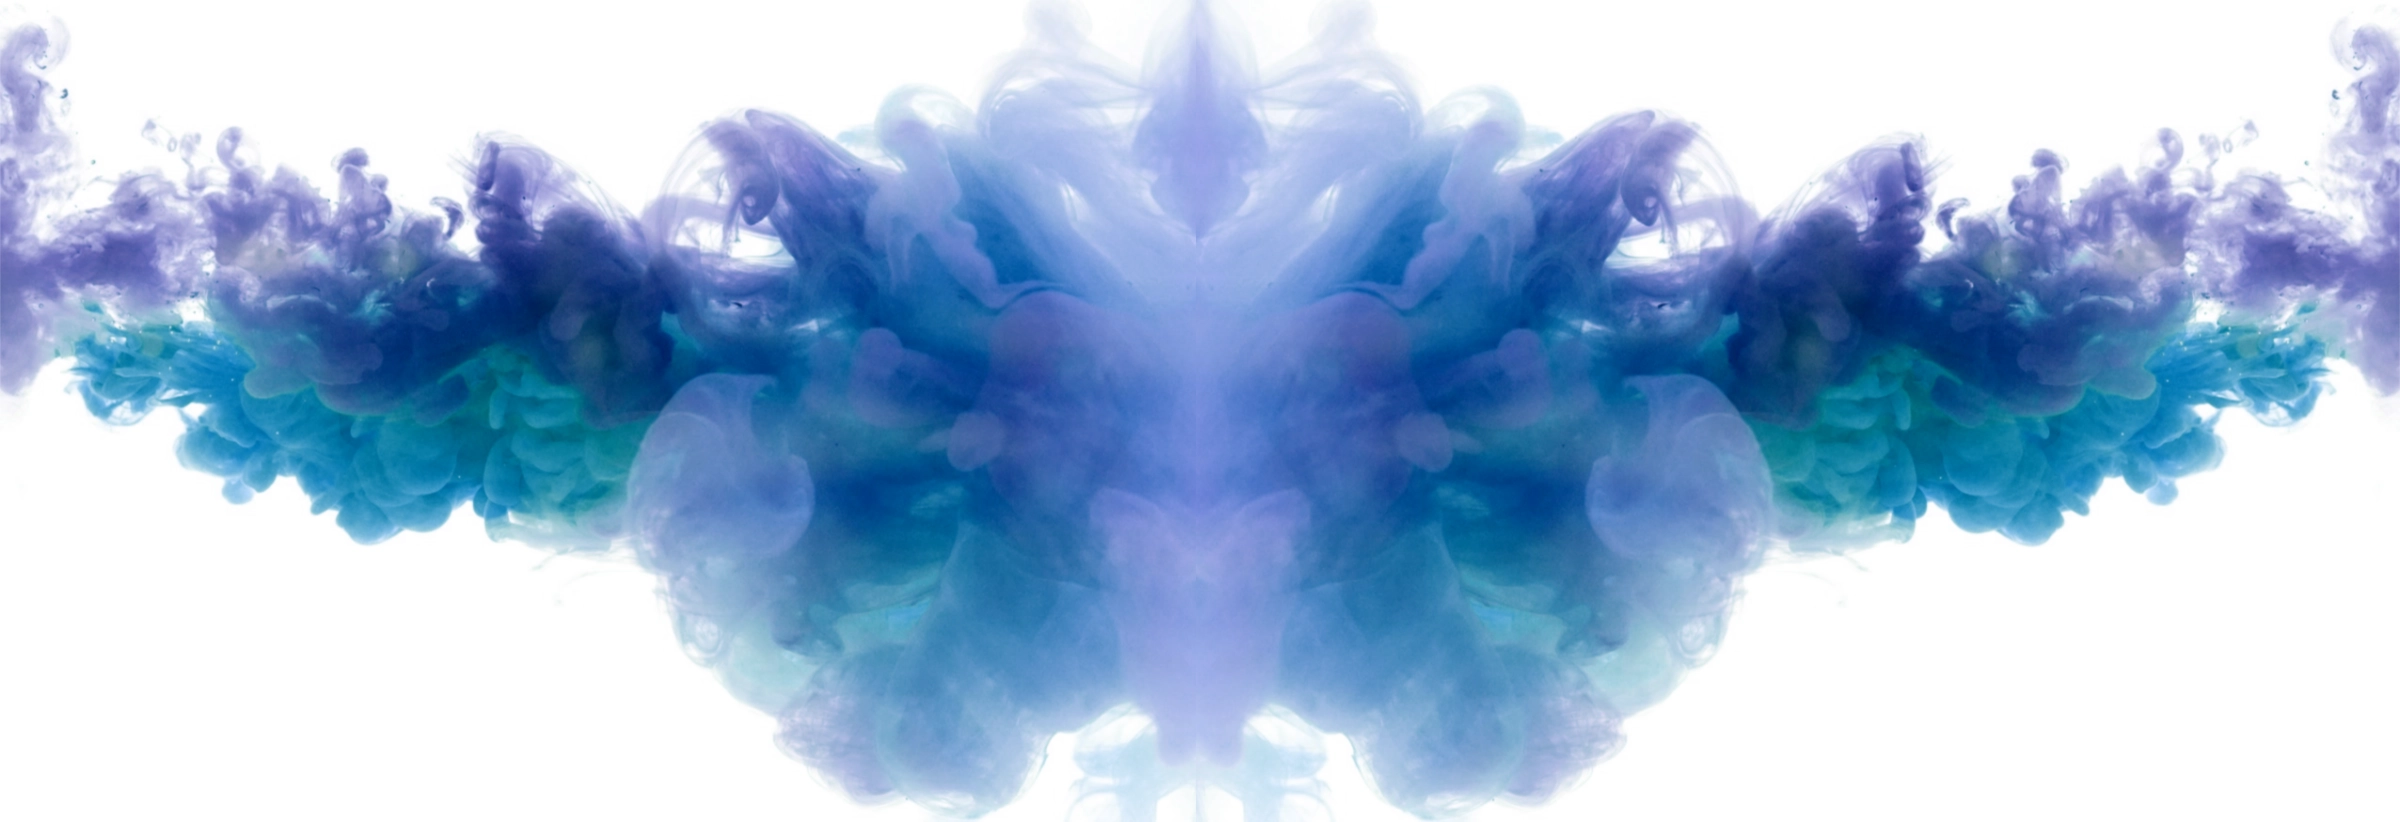 r313-blue-smoke-together-2-1566261712743.png